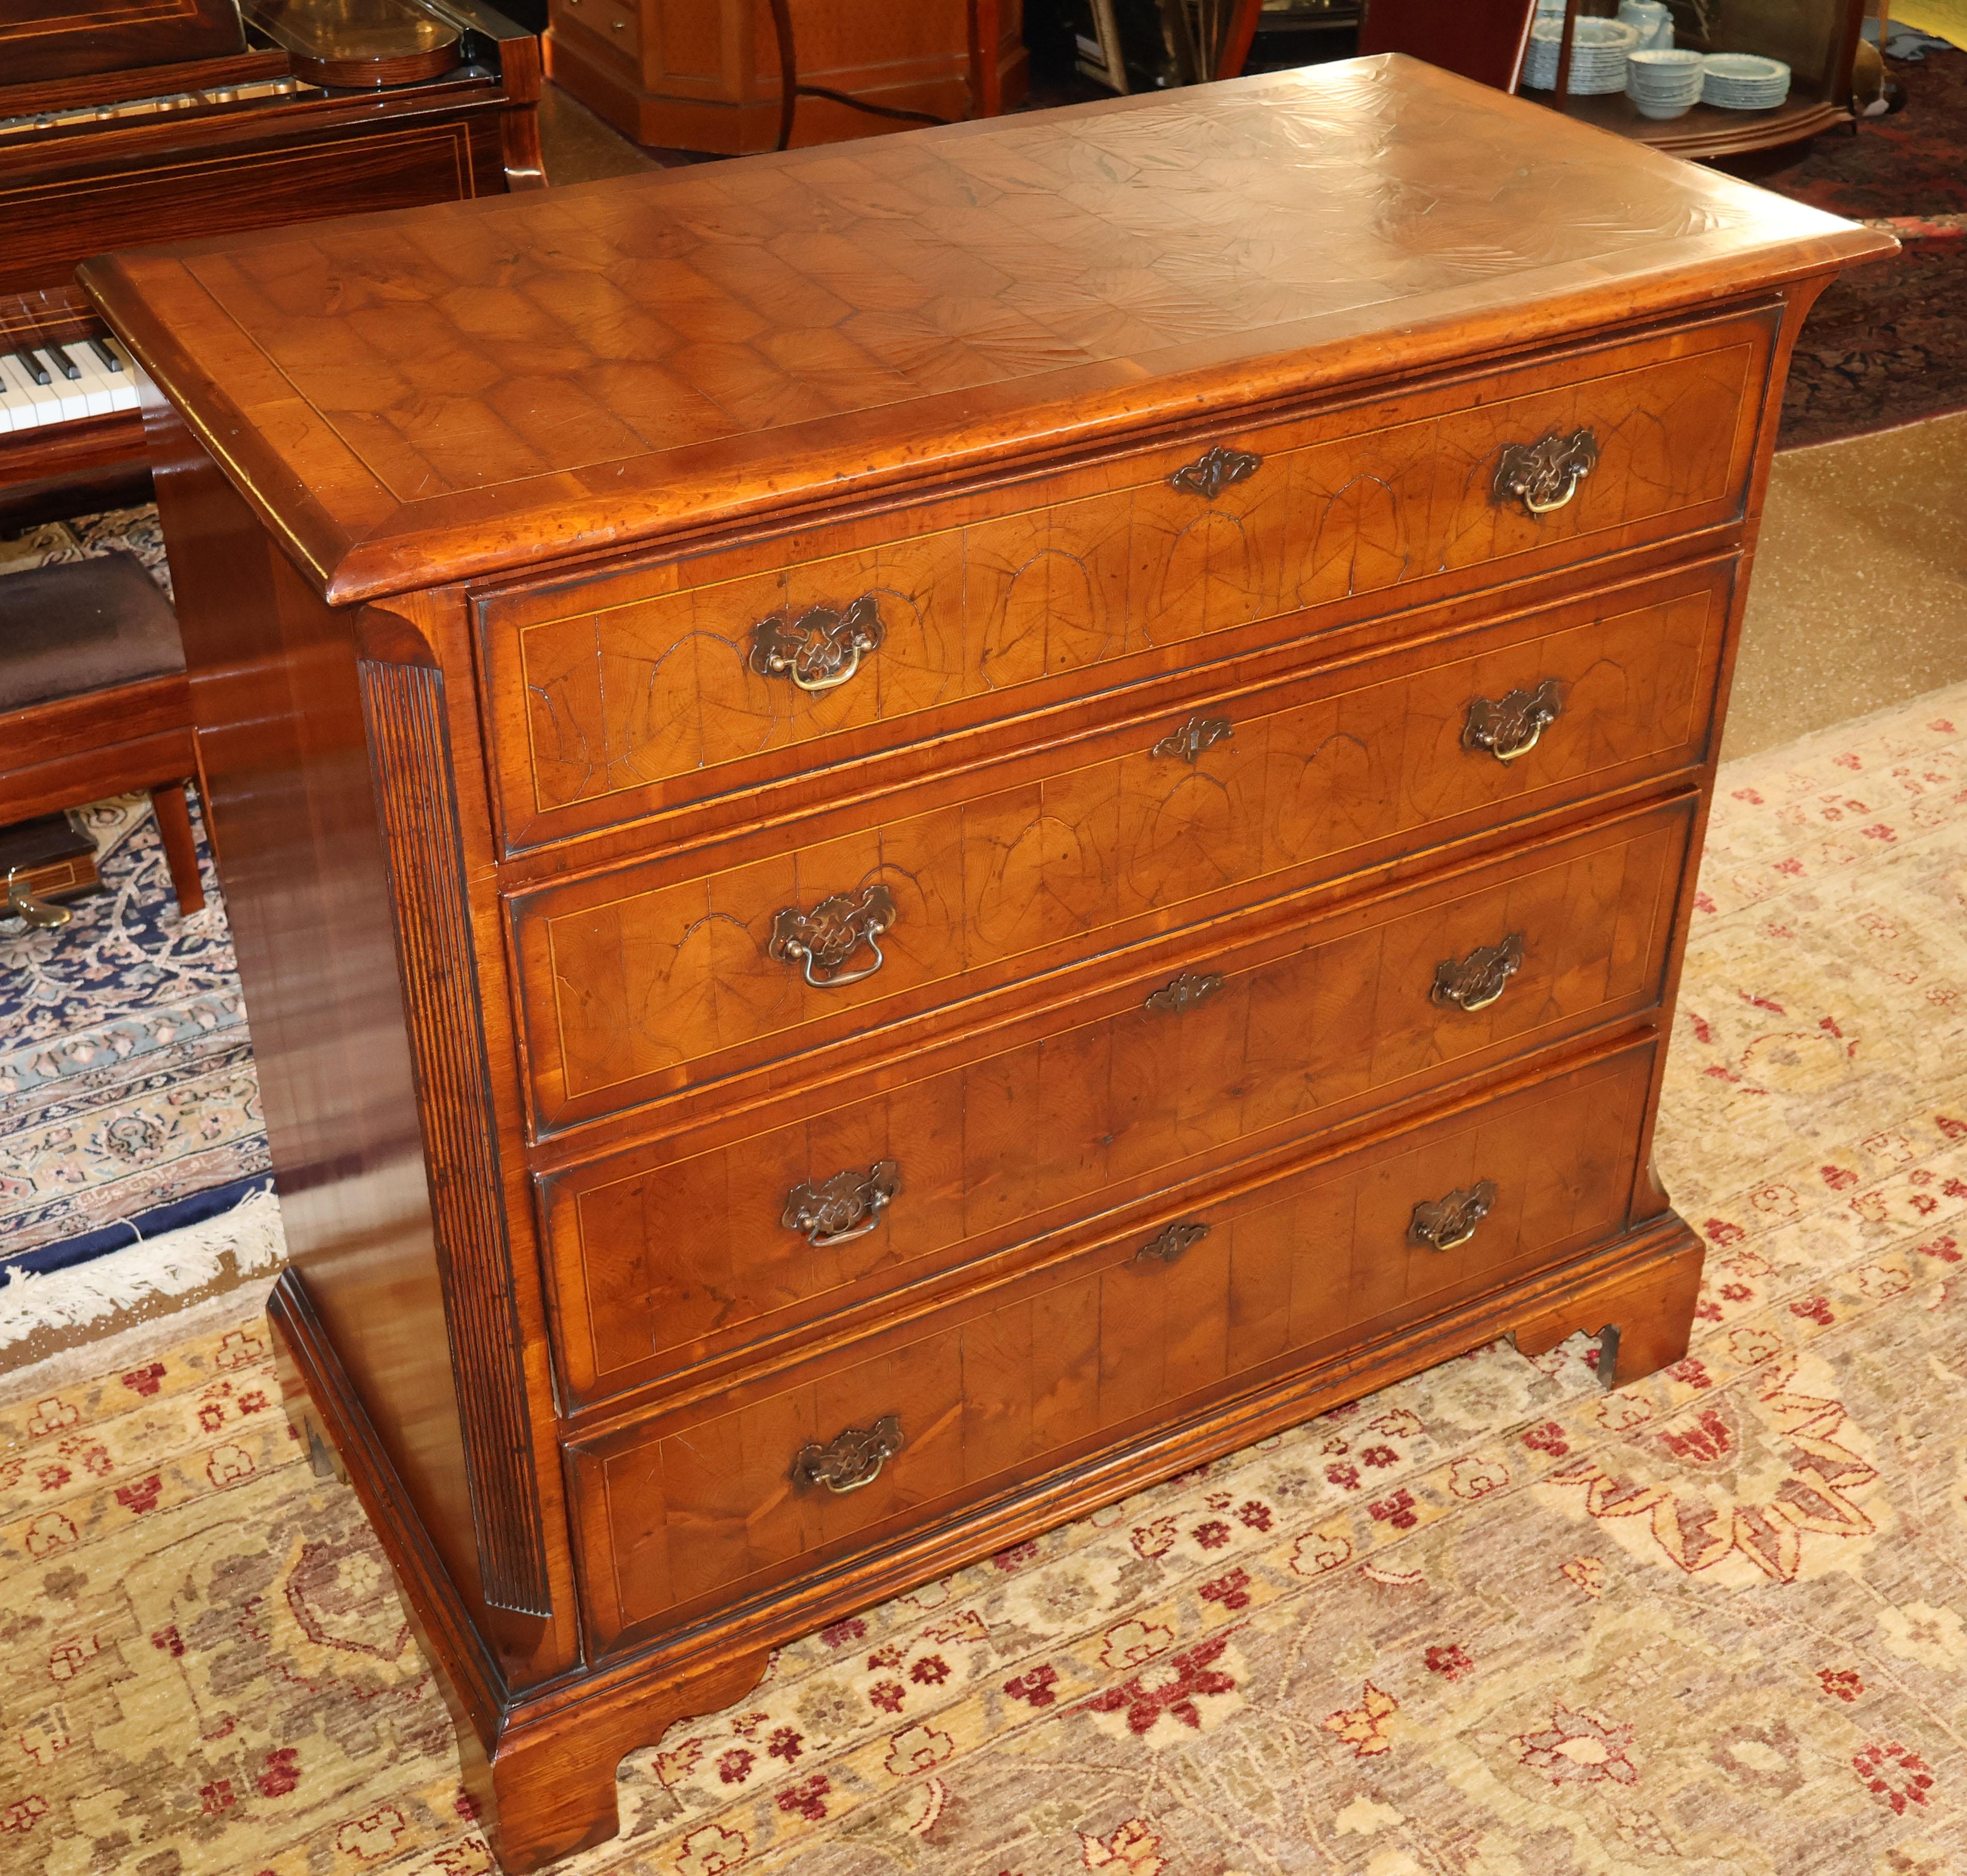 ​Gorgeous English George II Style Burled Oysterwood Dresser Chest of Drawers

Dimensions : 46